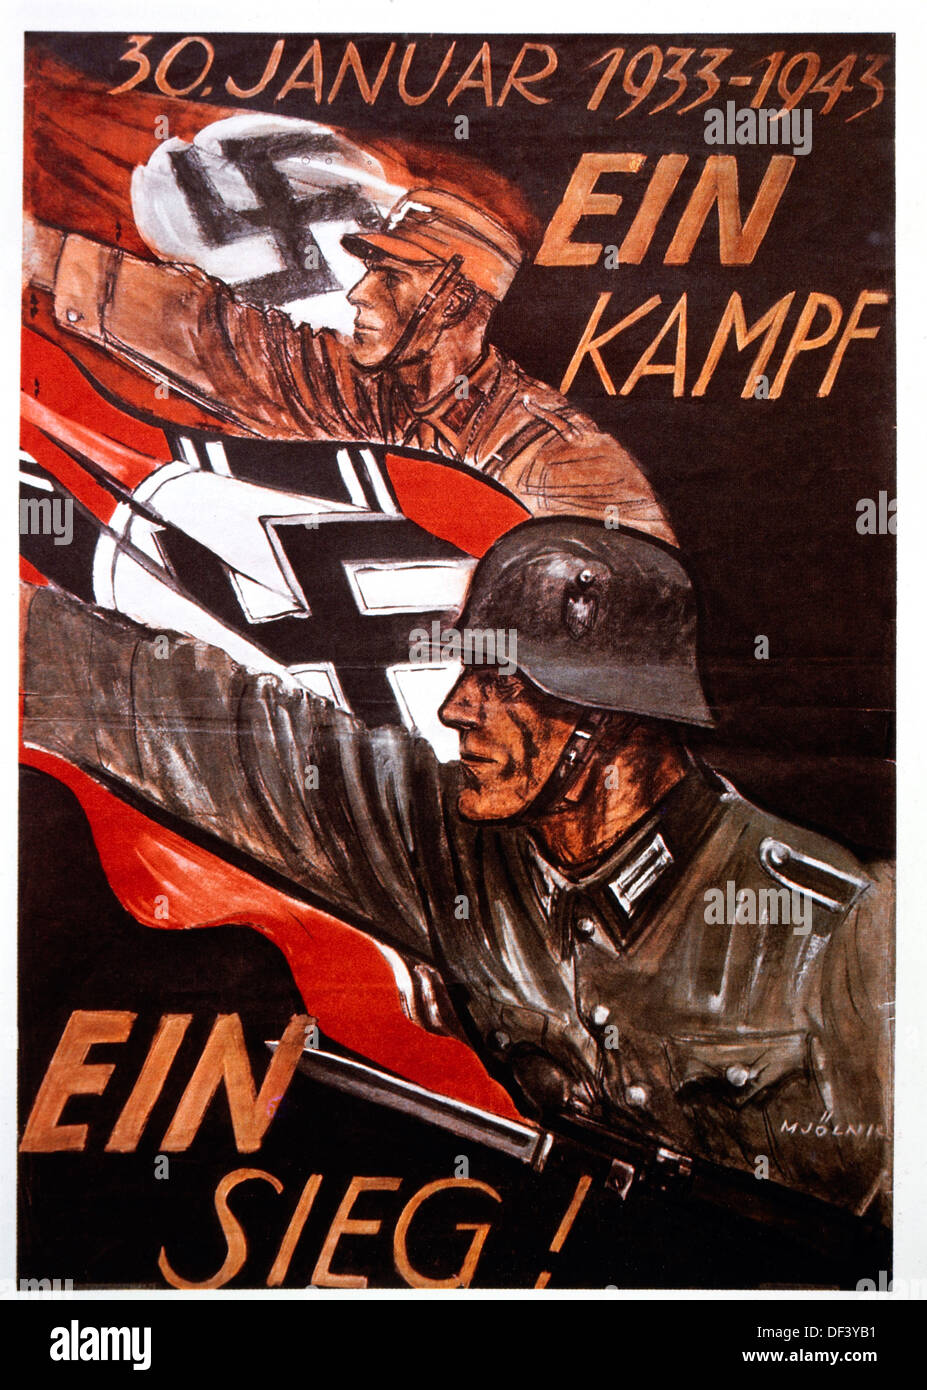 Nazi Poster Commemorating the 10th Anniversary of Adolf Hitler's Rise to Power, 'One Struggle, One Victory', 1943 Stock Photo